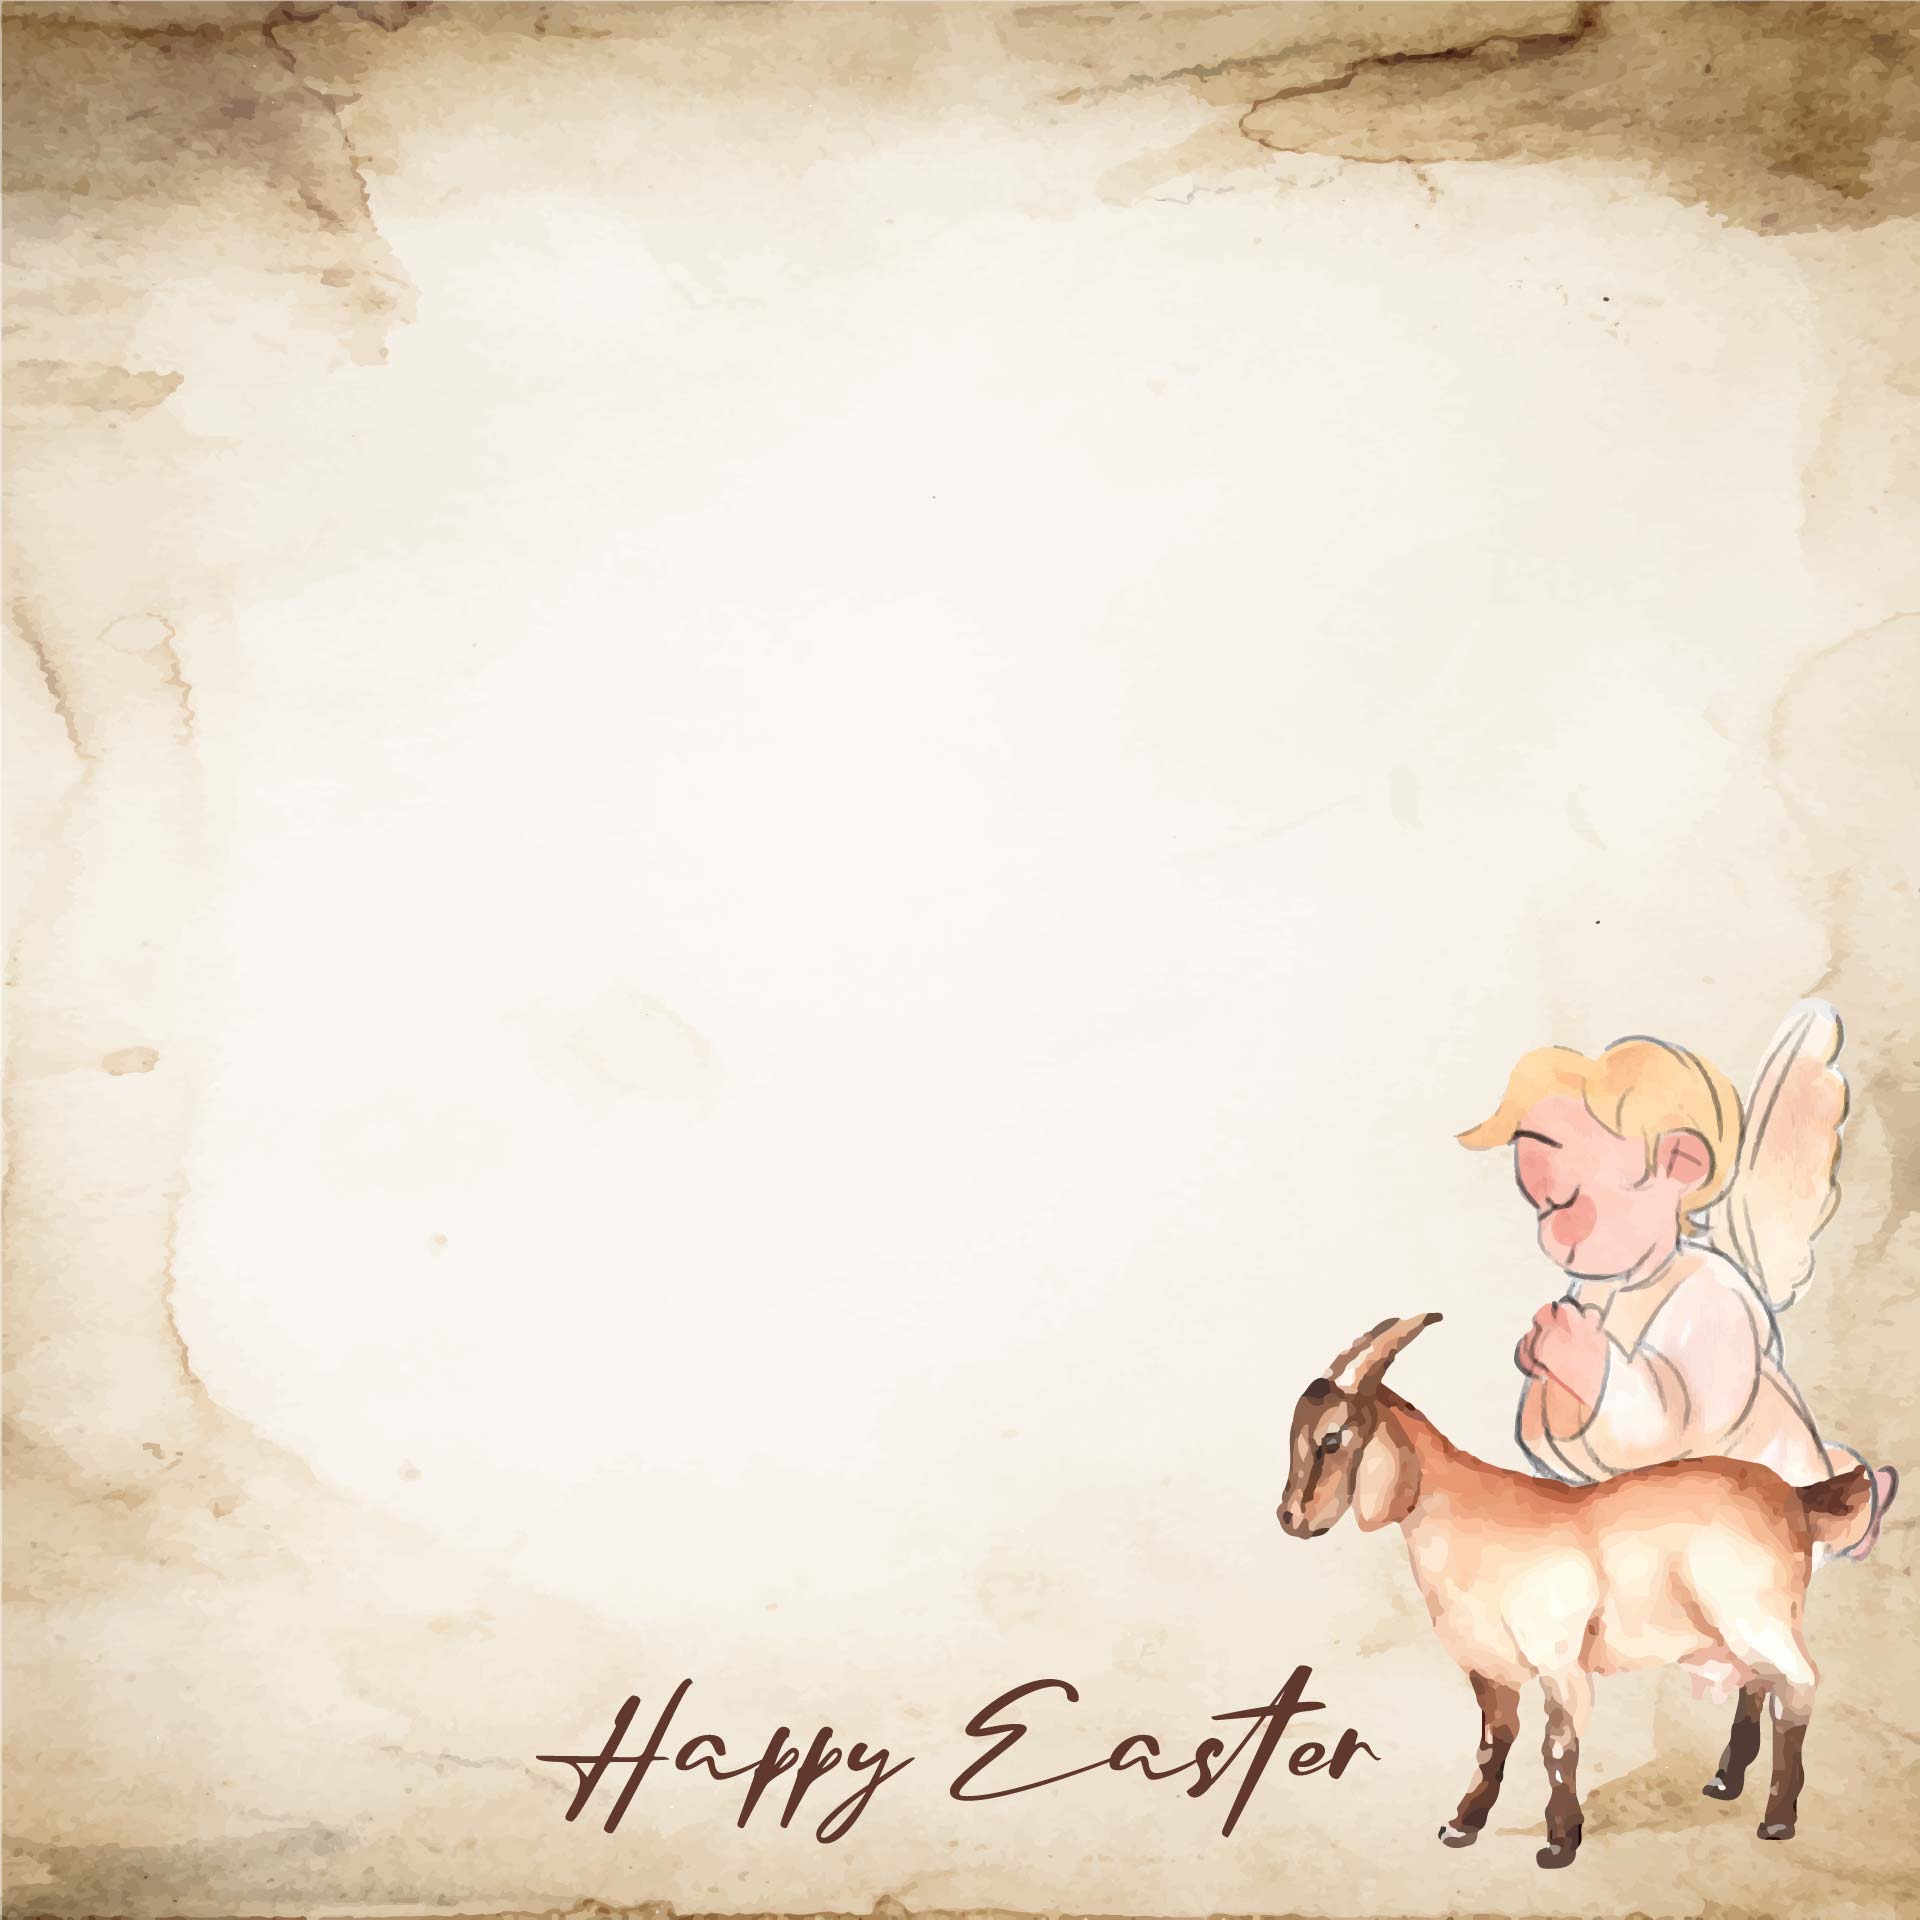 Printable Vintage Easter Card With Lamb And Angel